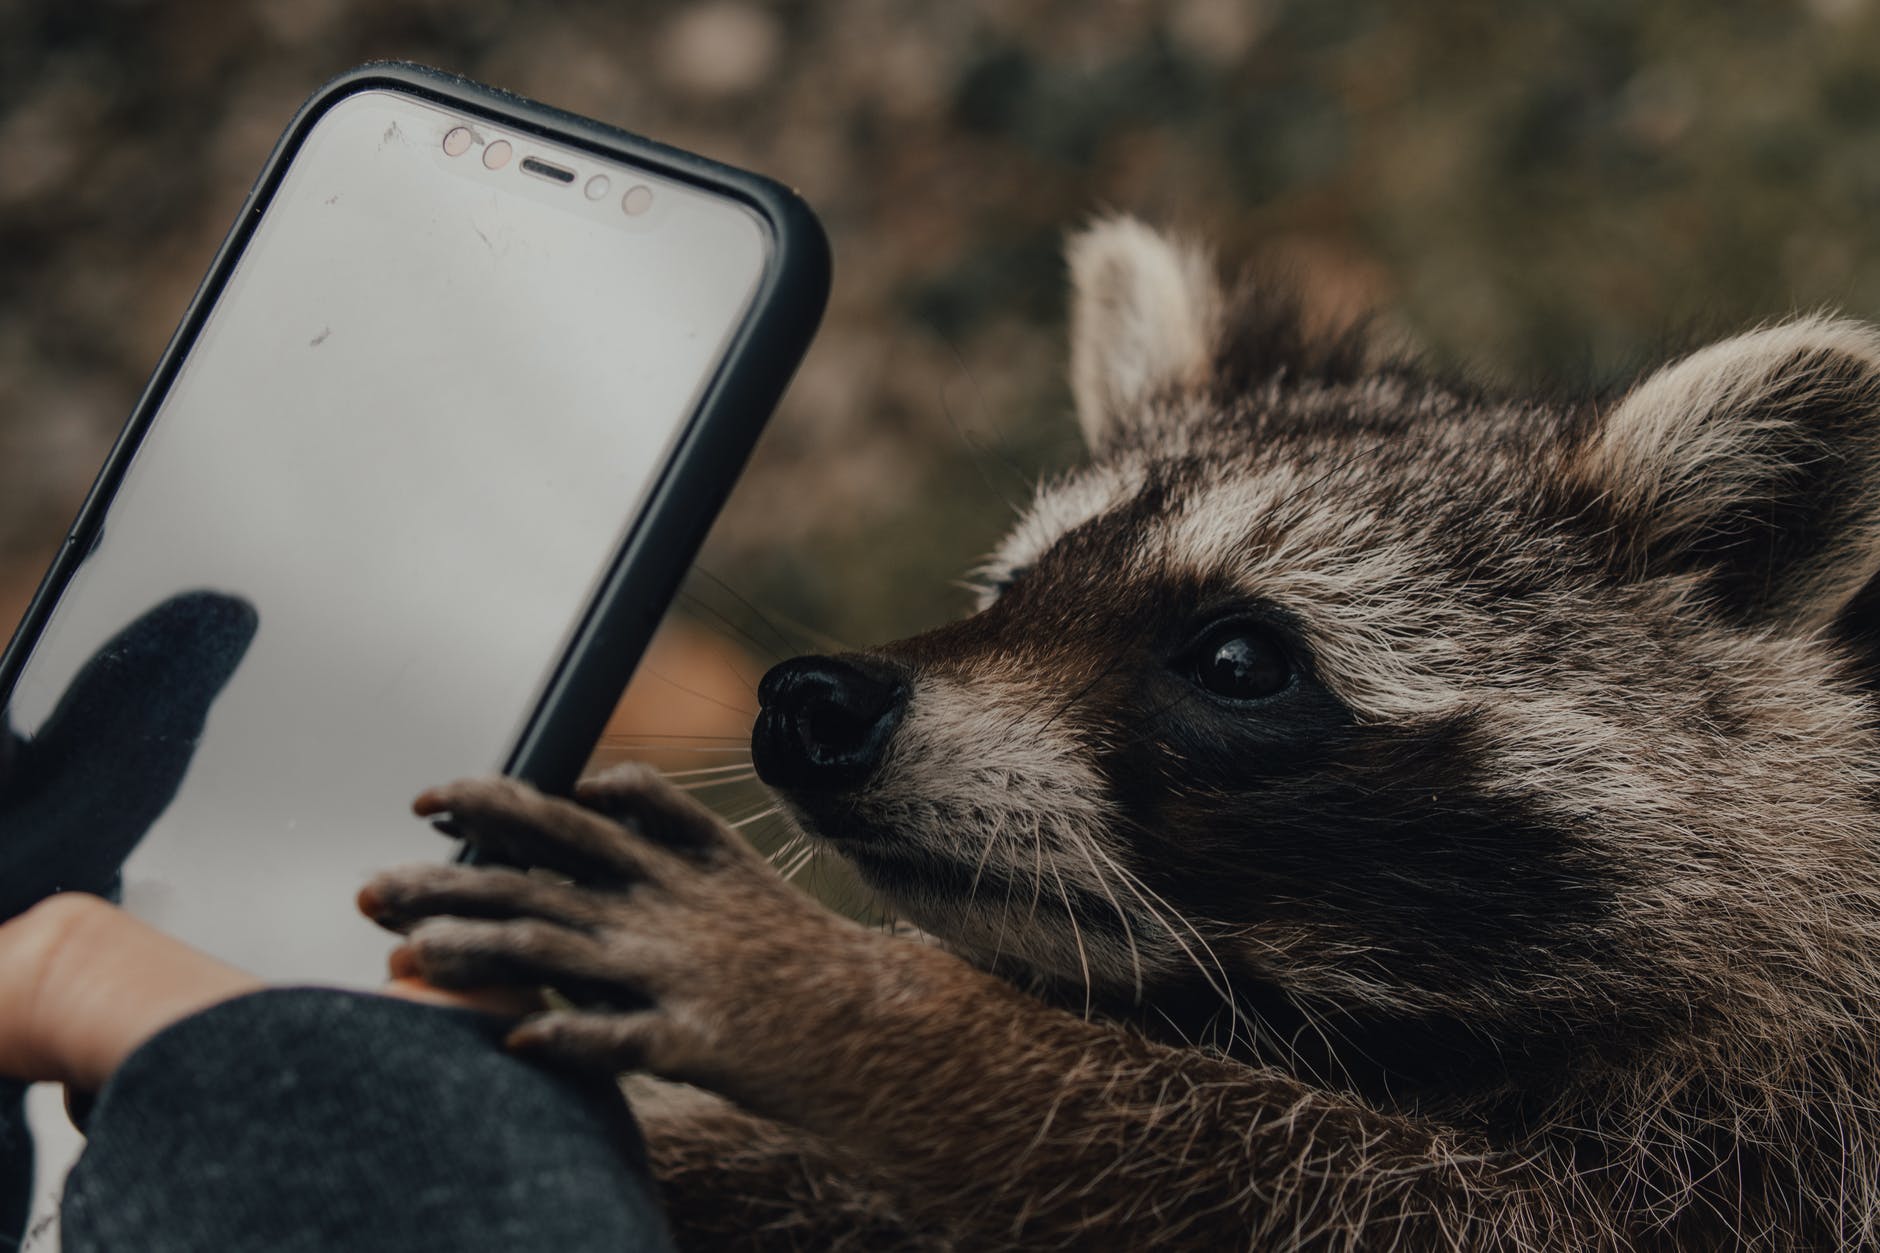 Patrick Ryan McCann | Here's What Industry Insiders Say About Tips For Wildlife Photography In 2022